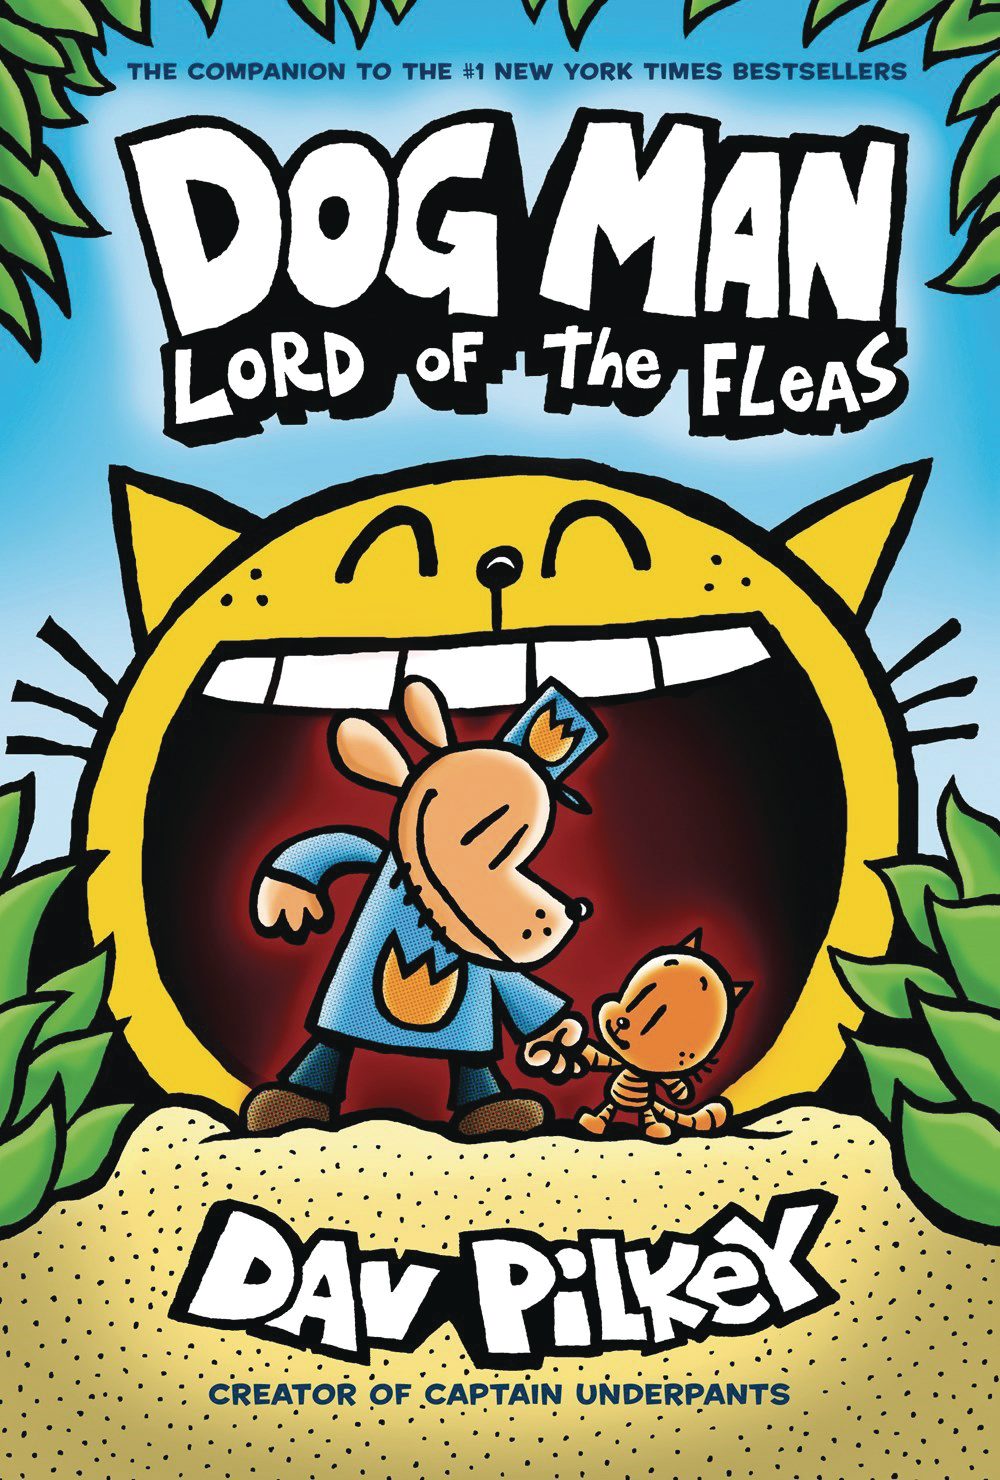 Dog Man Hardcover Graphic Novel Volume 5 Lord of the Fleas (2021 Printing)